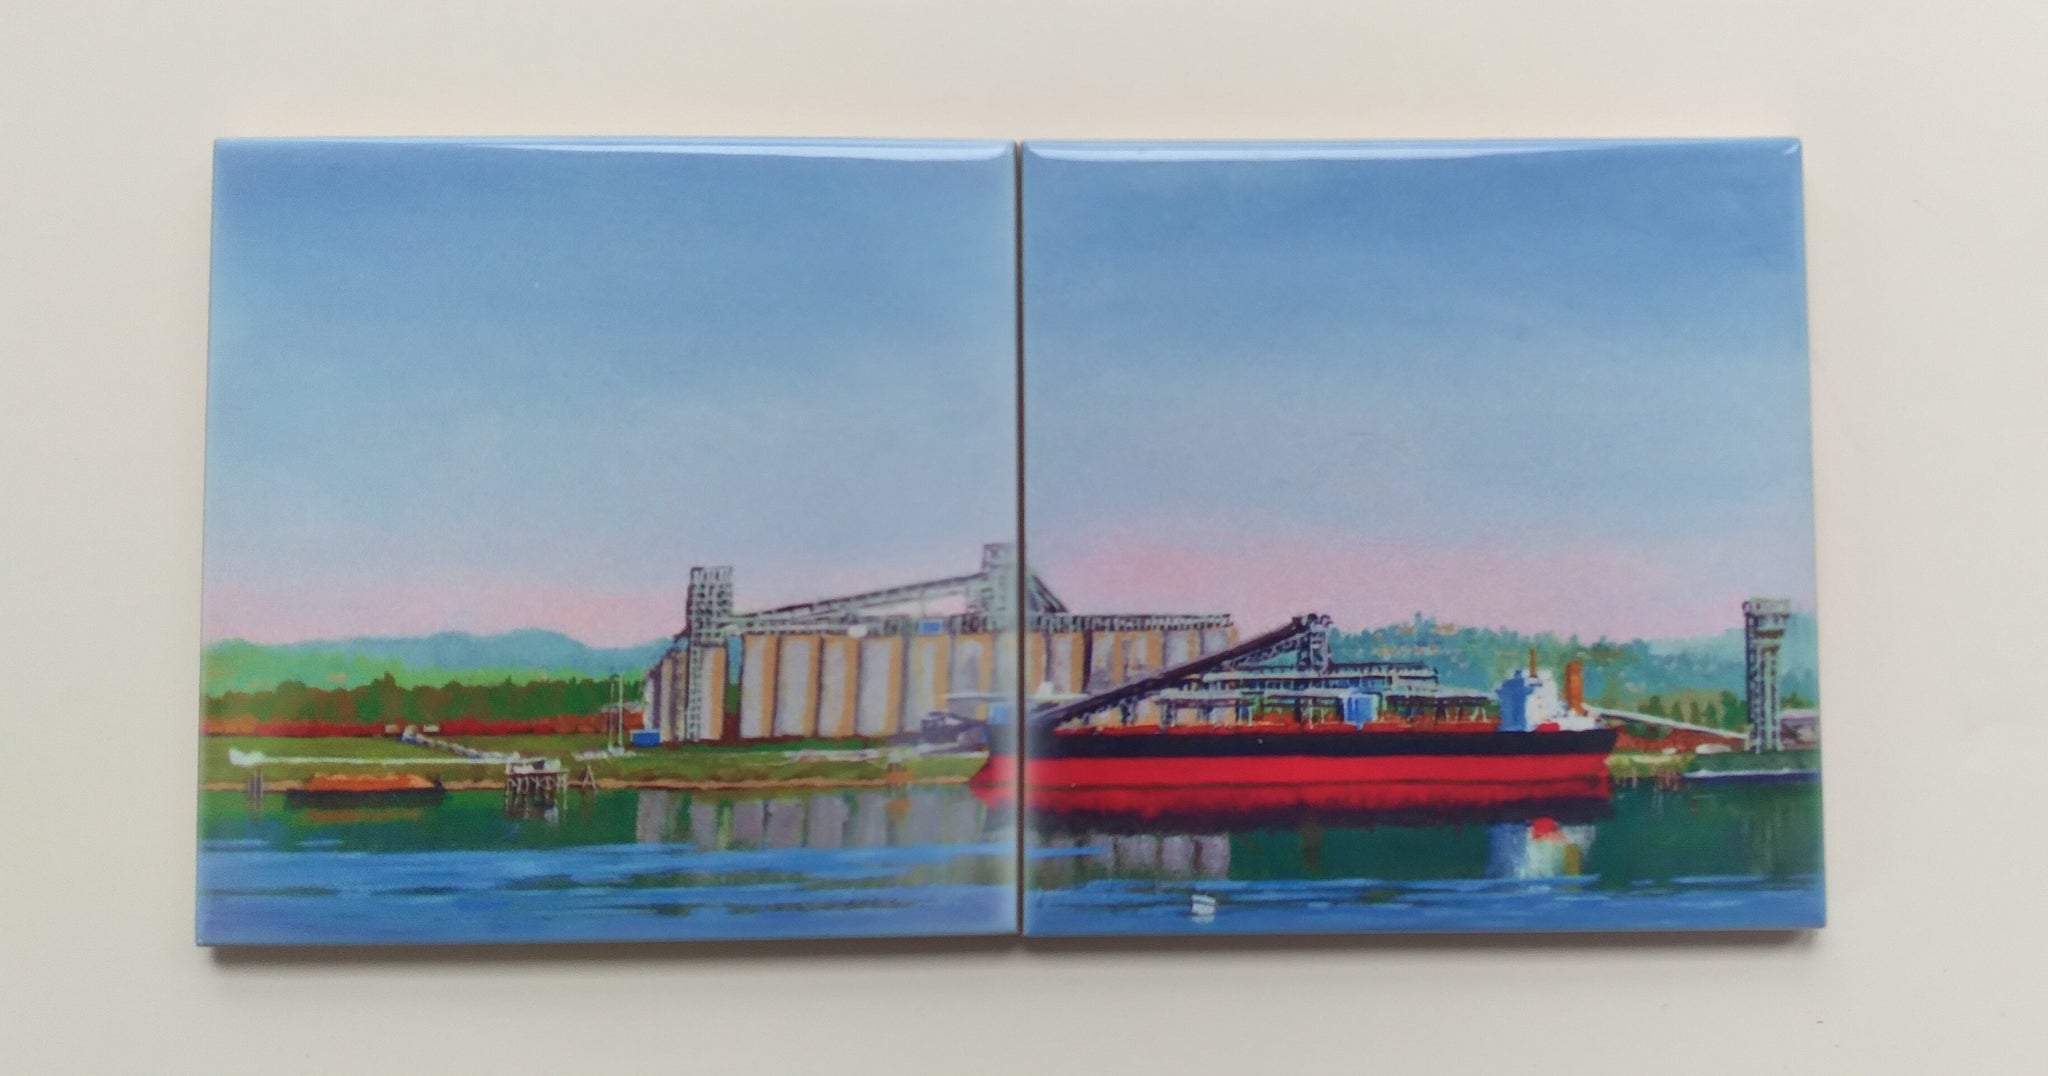 'Ship and Silos in Evening Light' Set of 2 Ceramic Tile Coasters